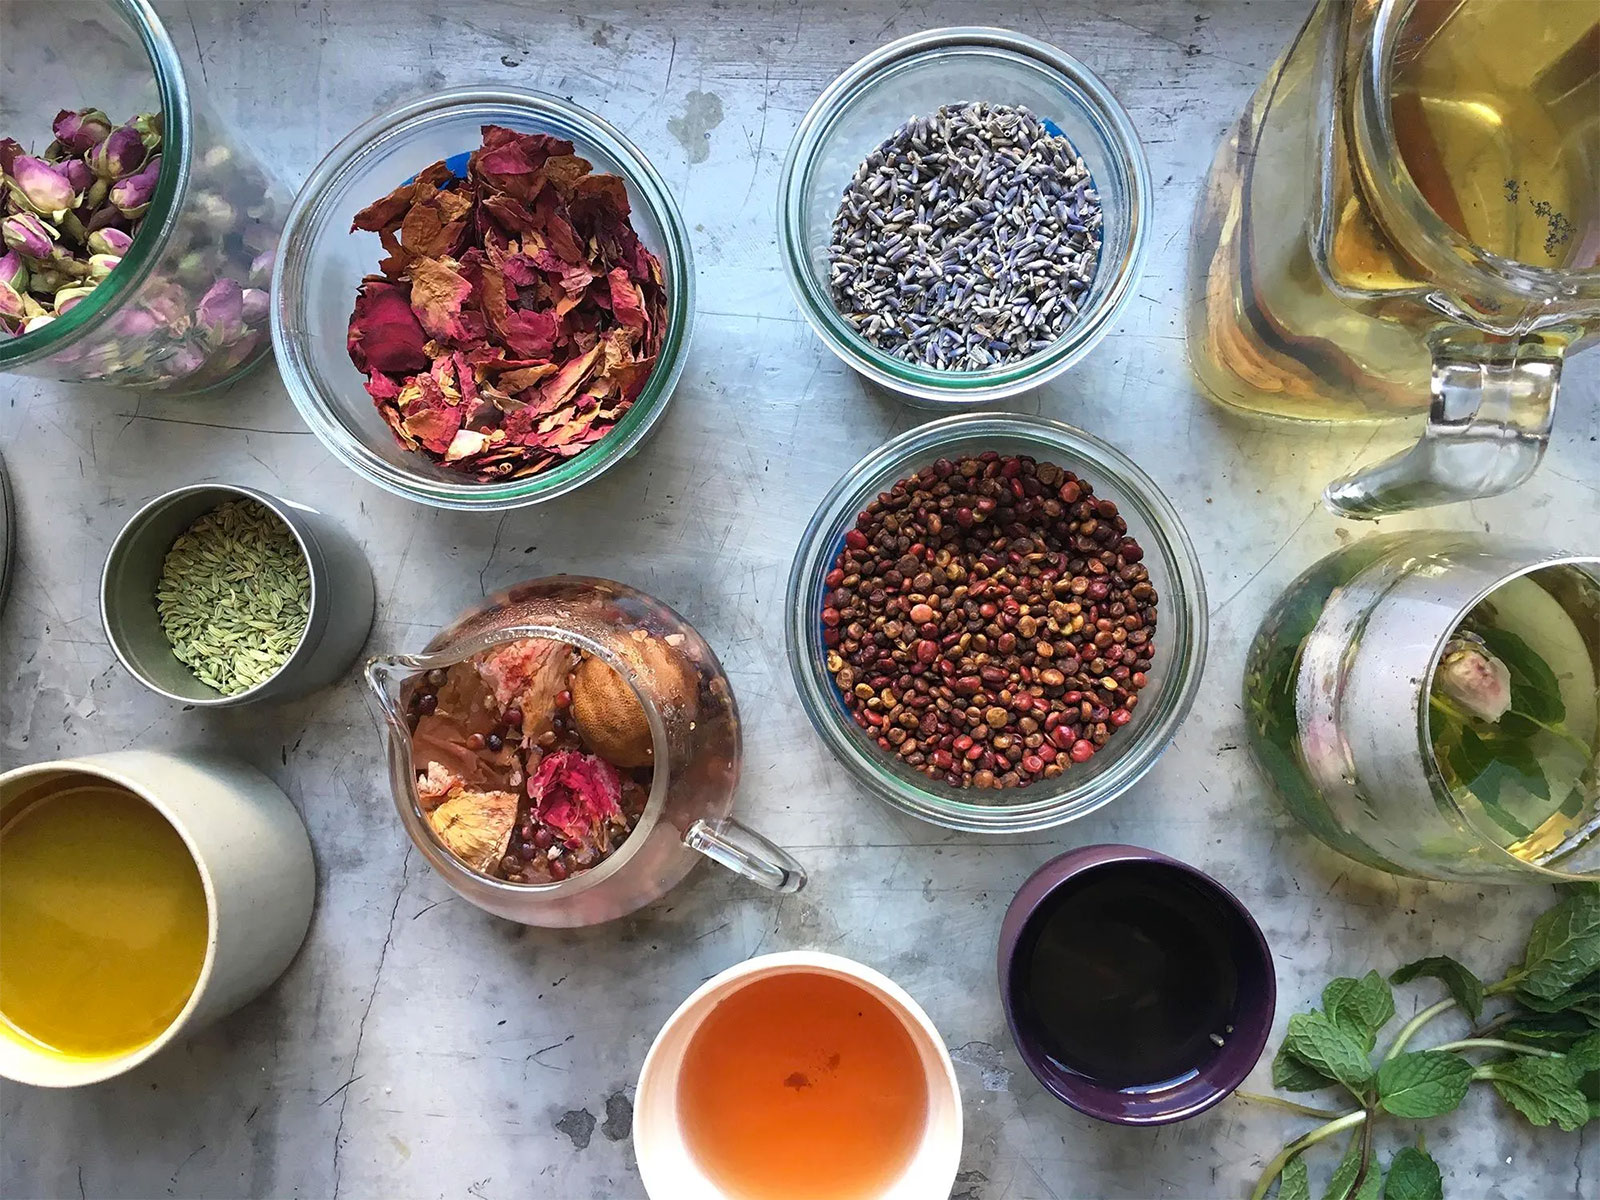 👵 If You Have 12/23 of These Things at Home, Then You’re Definitely a Grandma Herbal Teas